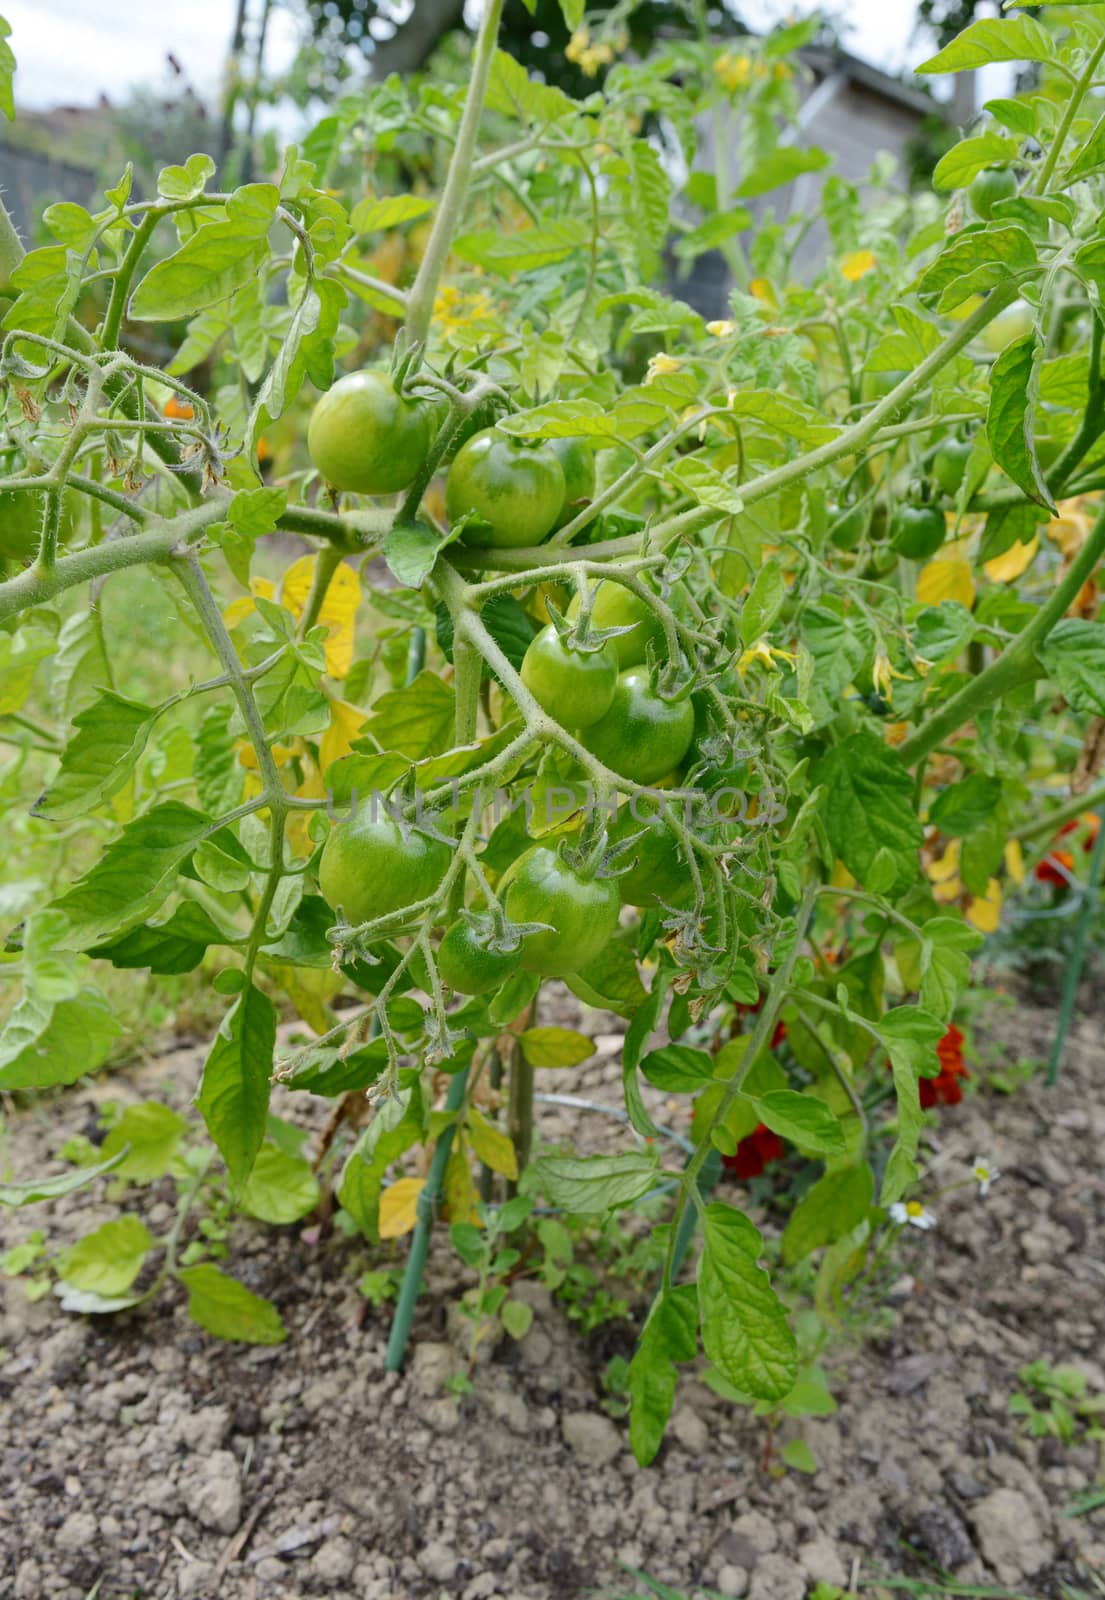 Red alert tomatoes grow on a tomato plant, the branch bending under the weight of the growing fruit